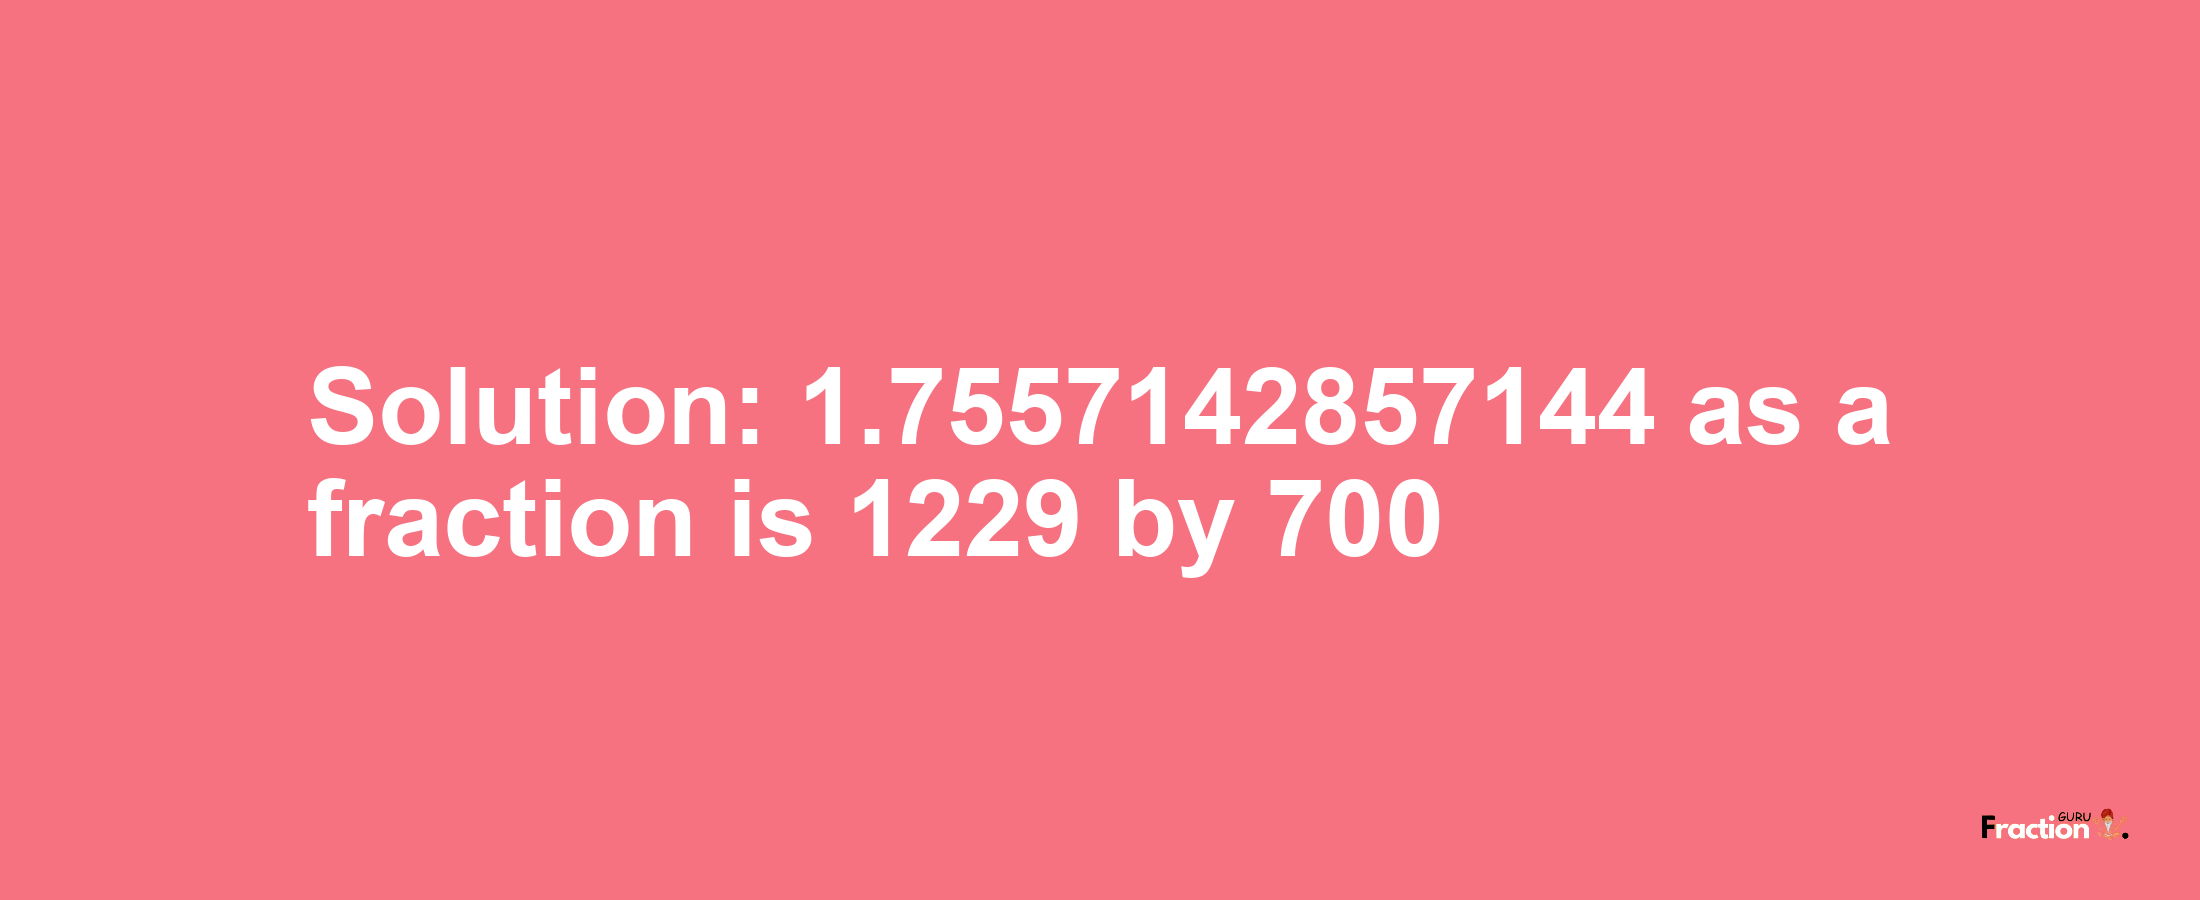 Solution:1.7557142857144 as a fraction is 1229/700